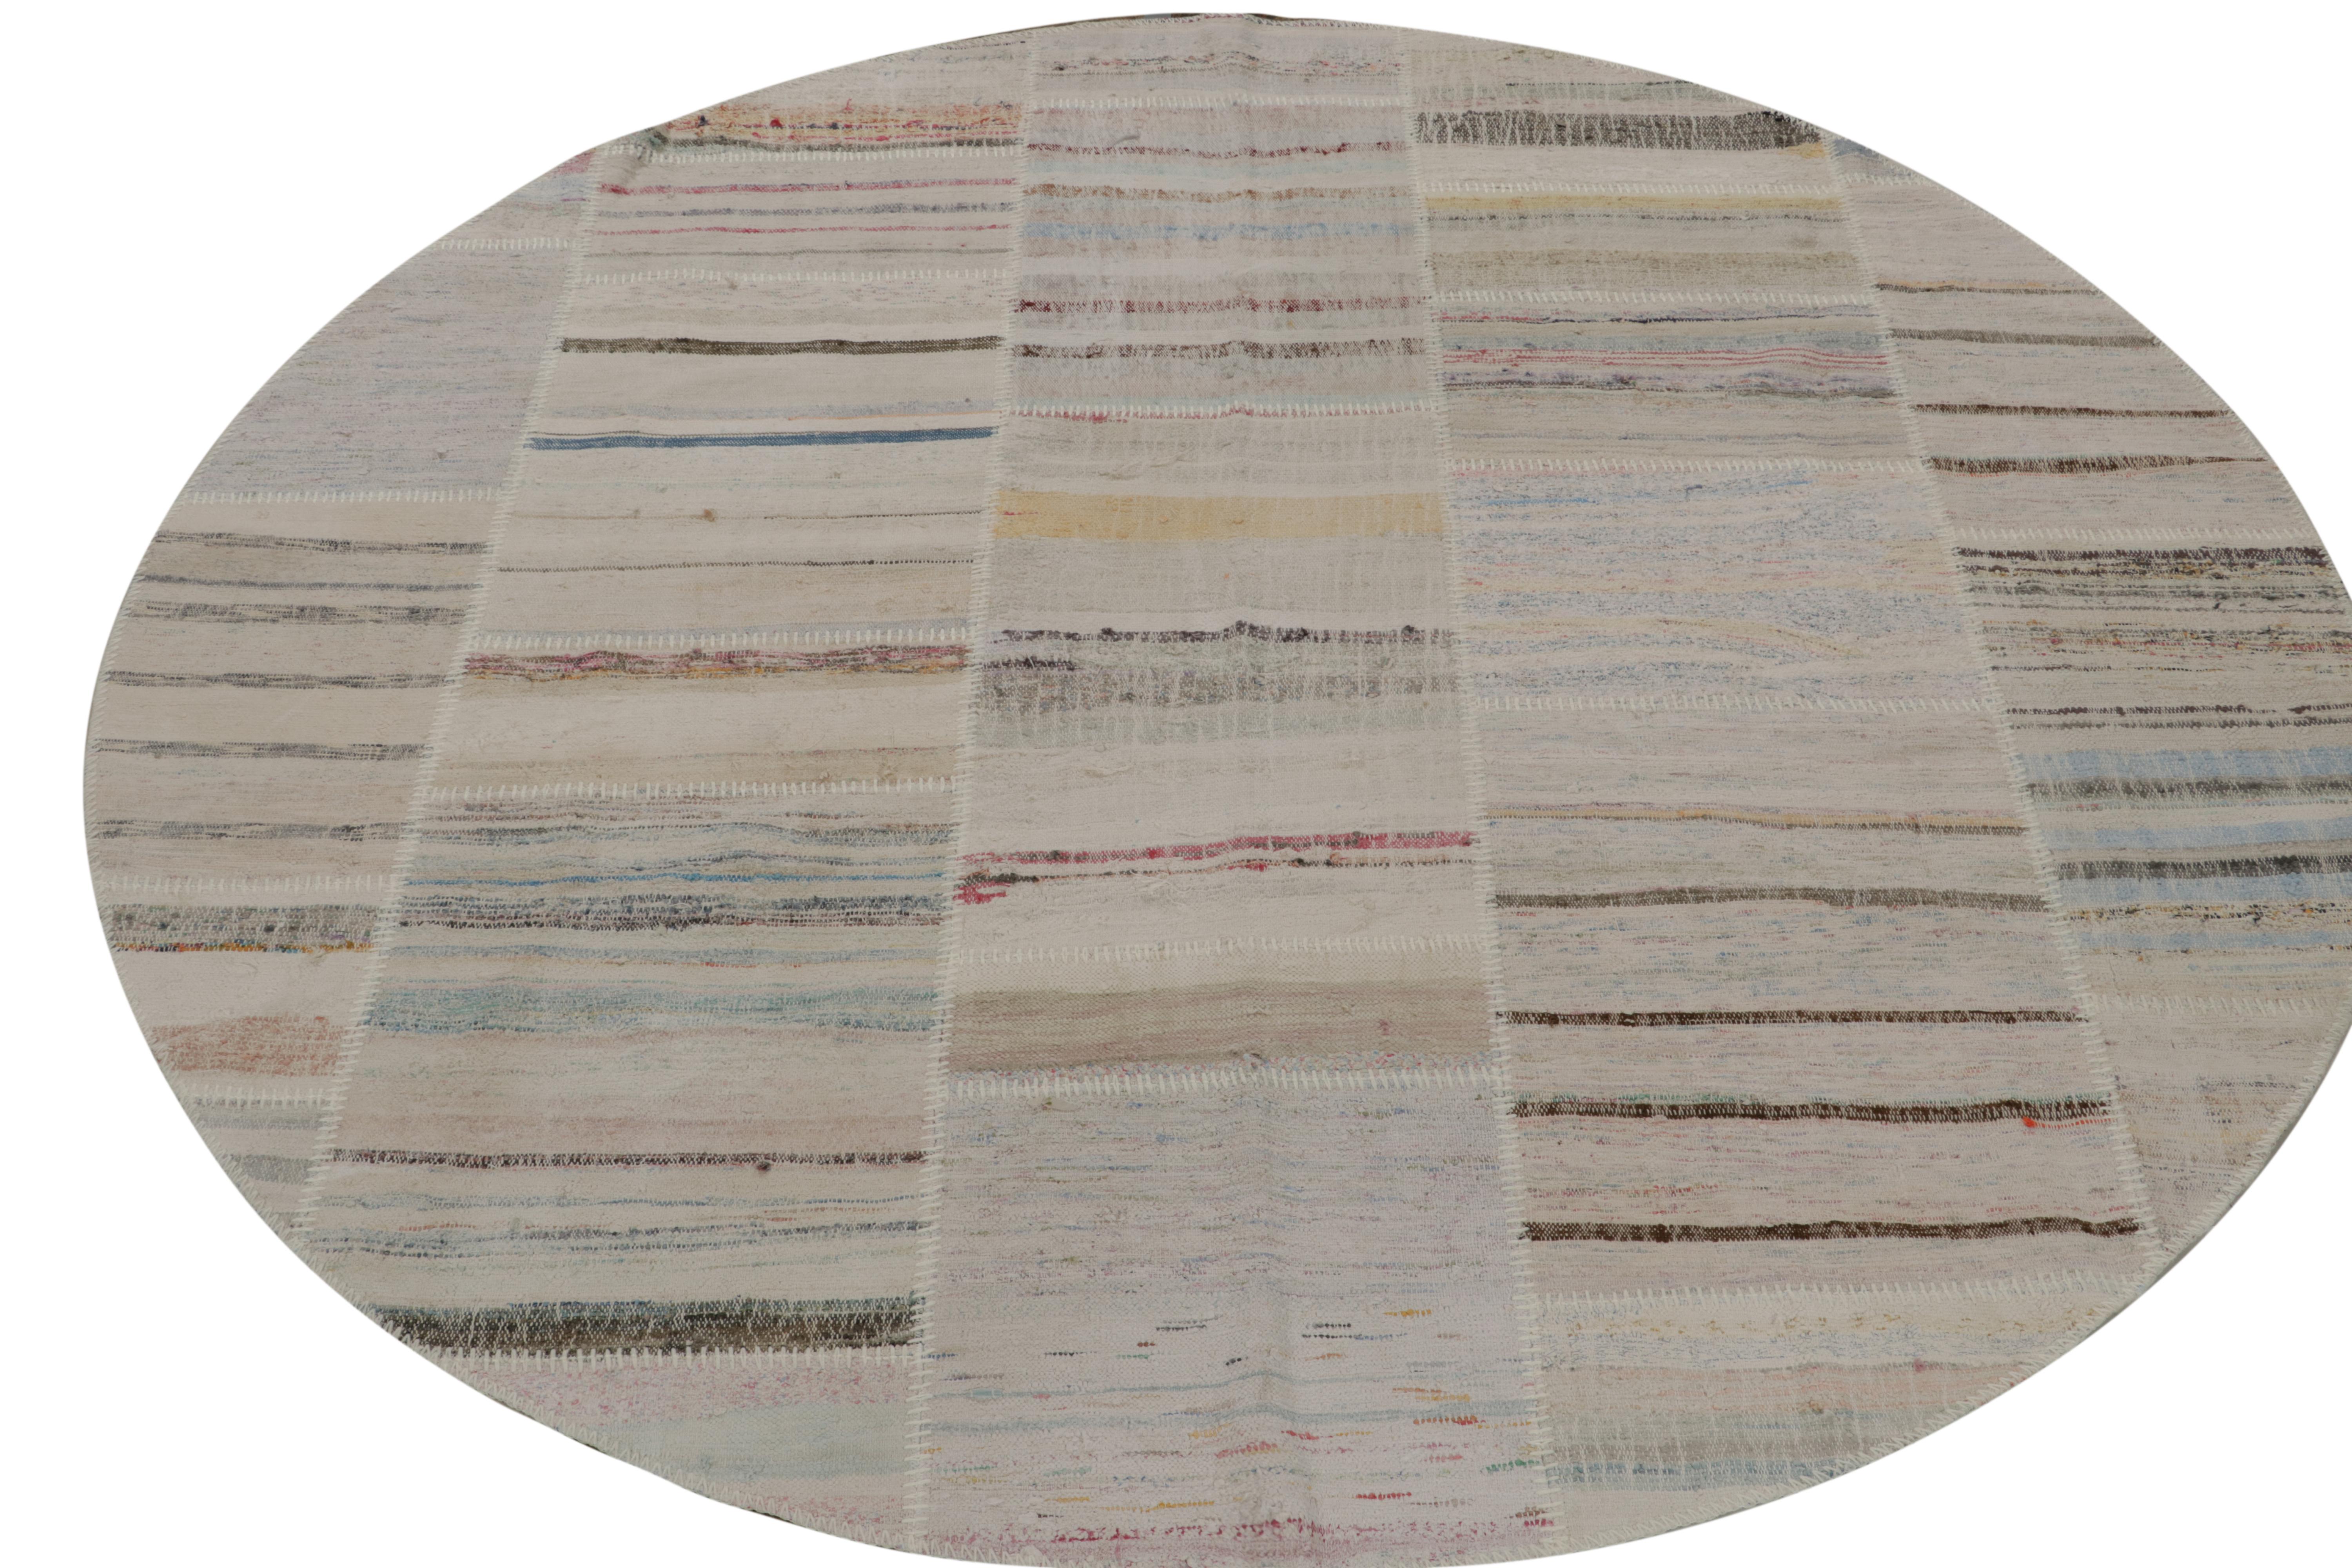 Handwoven in wool, Rug & Kilim presents a spacious 8x8 circle rug from their innovative new patchwork kilim collection. 

On the Design: 

This flat weave technique repurposes vintage yarns in polychromatic stripes and striae, achieving a